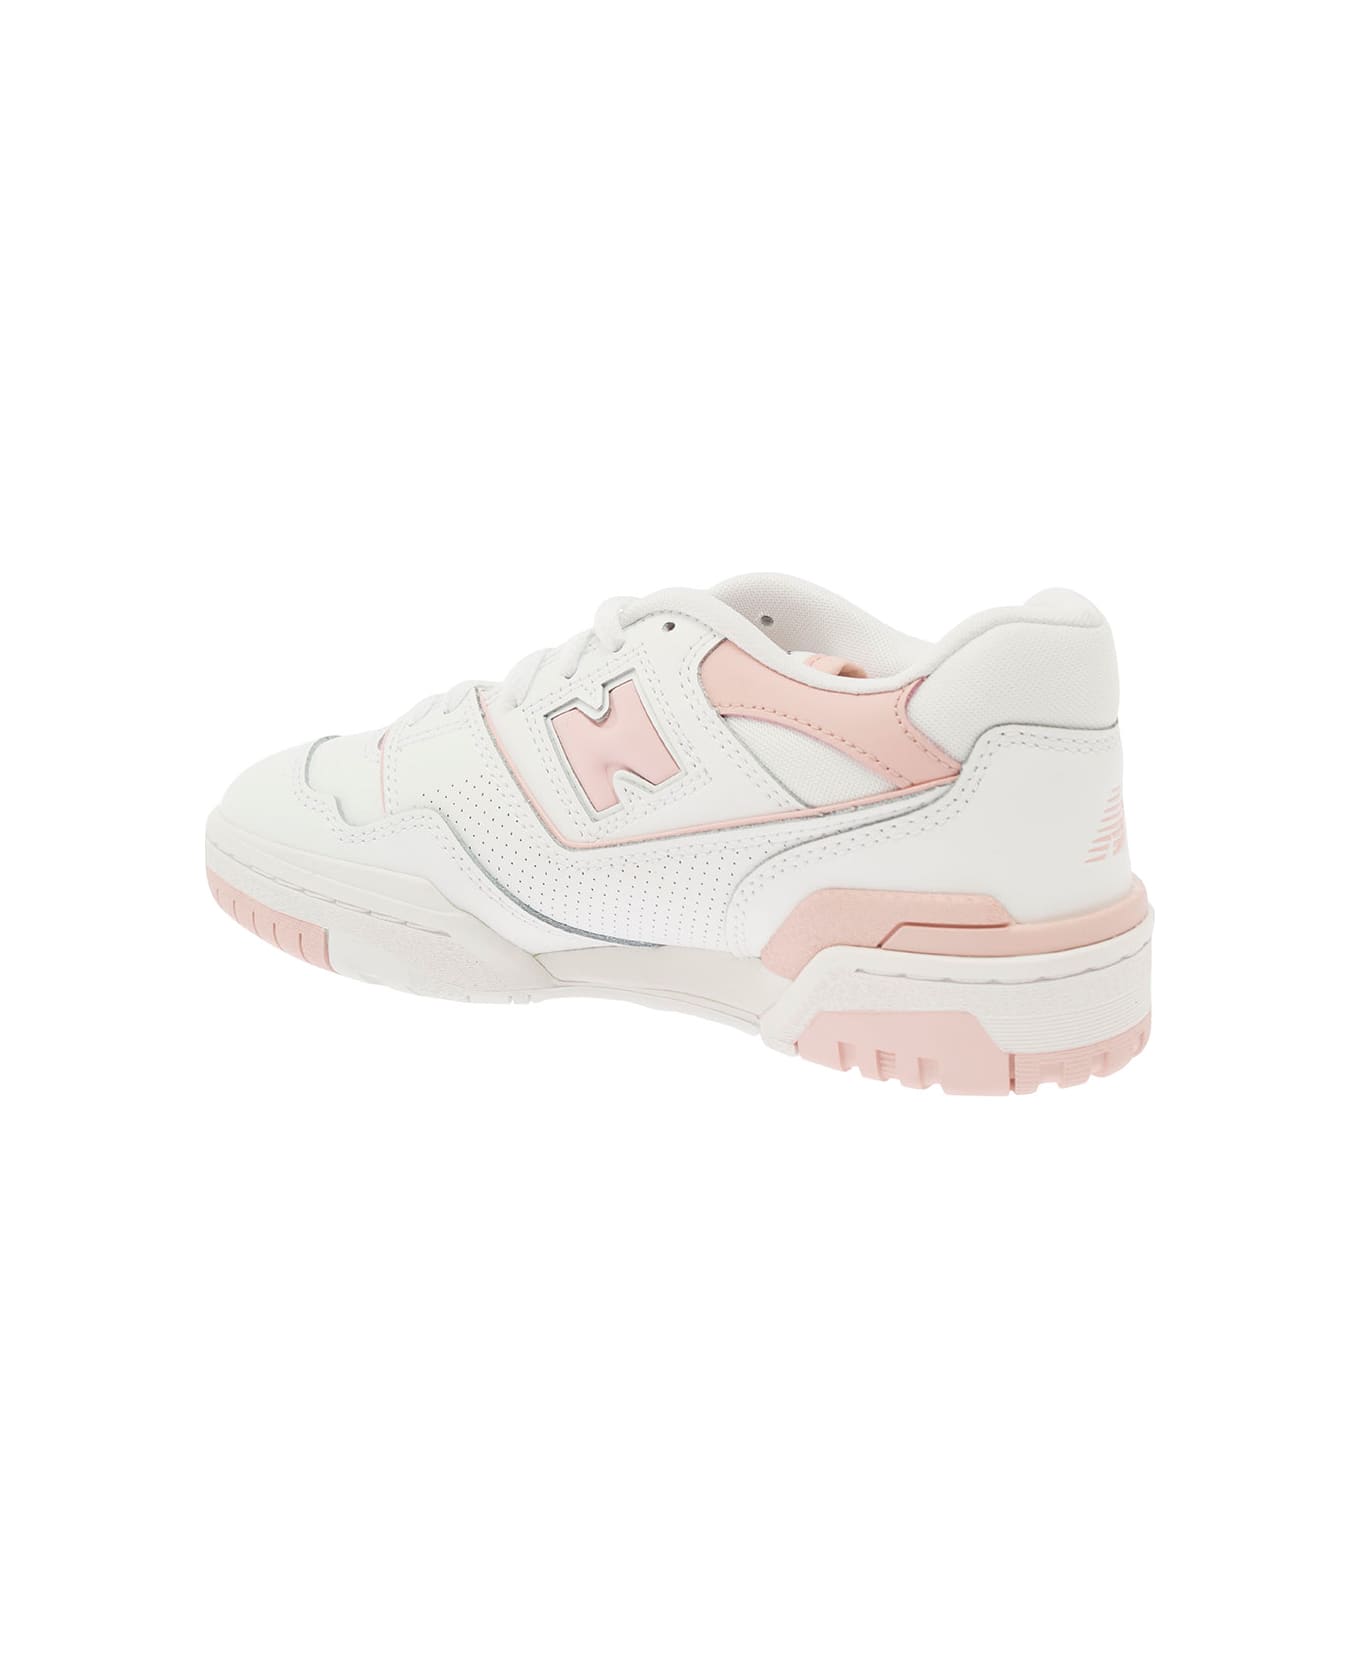 New Balance '550' White And Light Pink Low Top Sneakers With Logo In Leather Woman - Pink